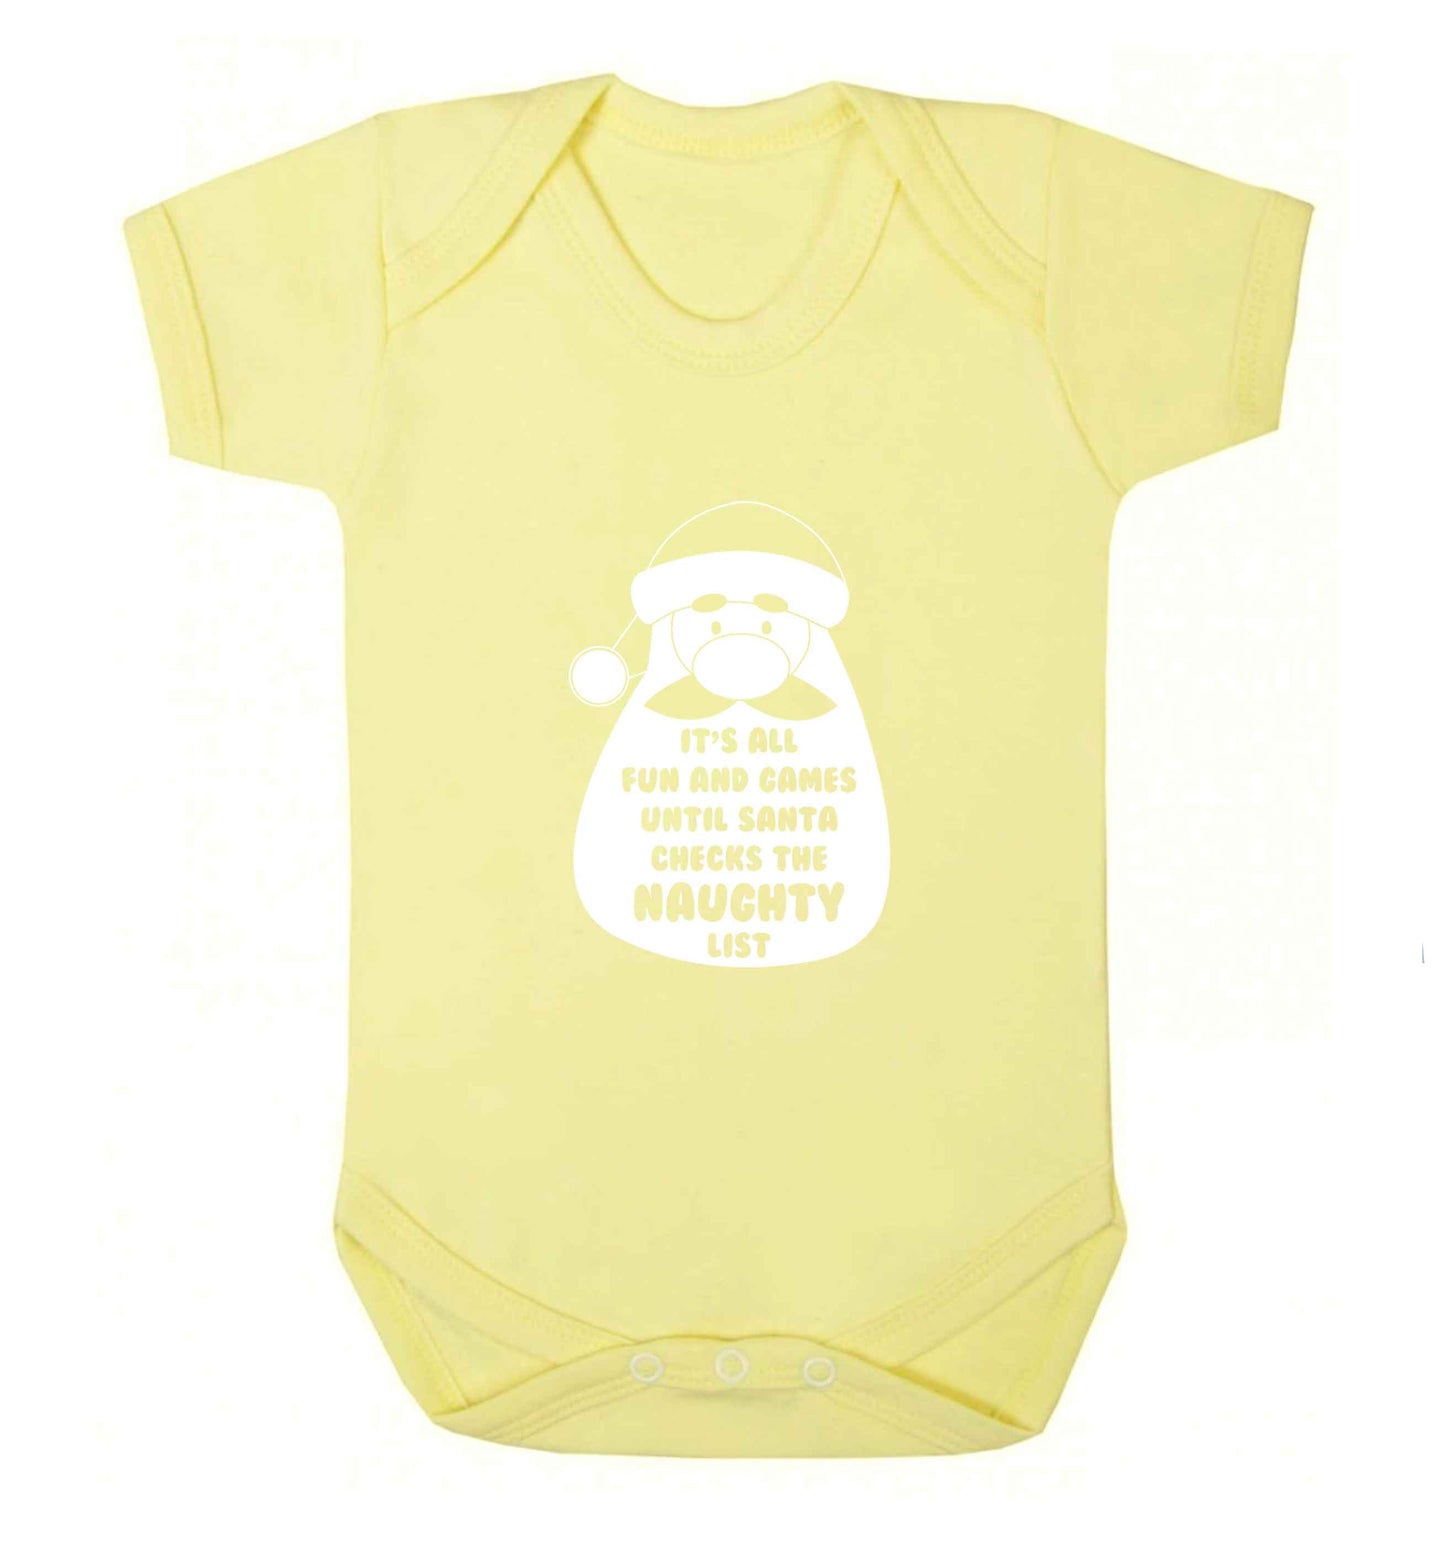 It's all fun and games until Santa checks the naughty list baby vest pale yellow 18-24 months